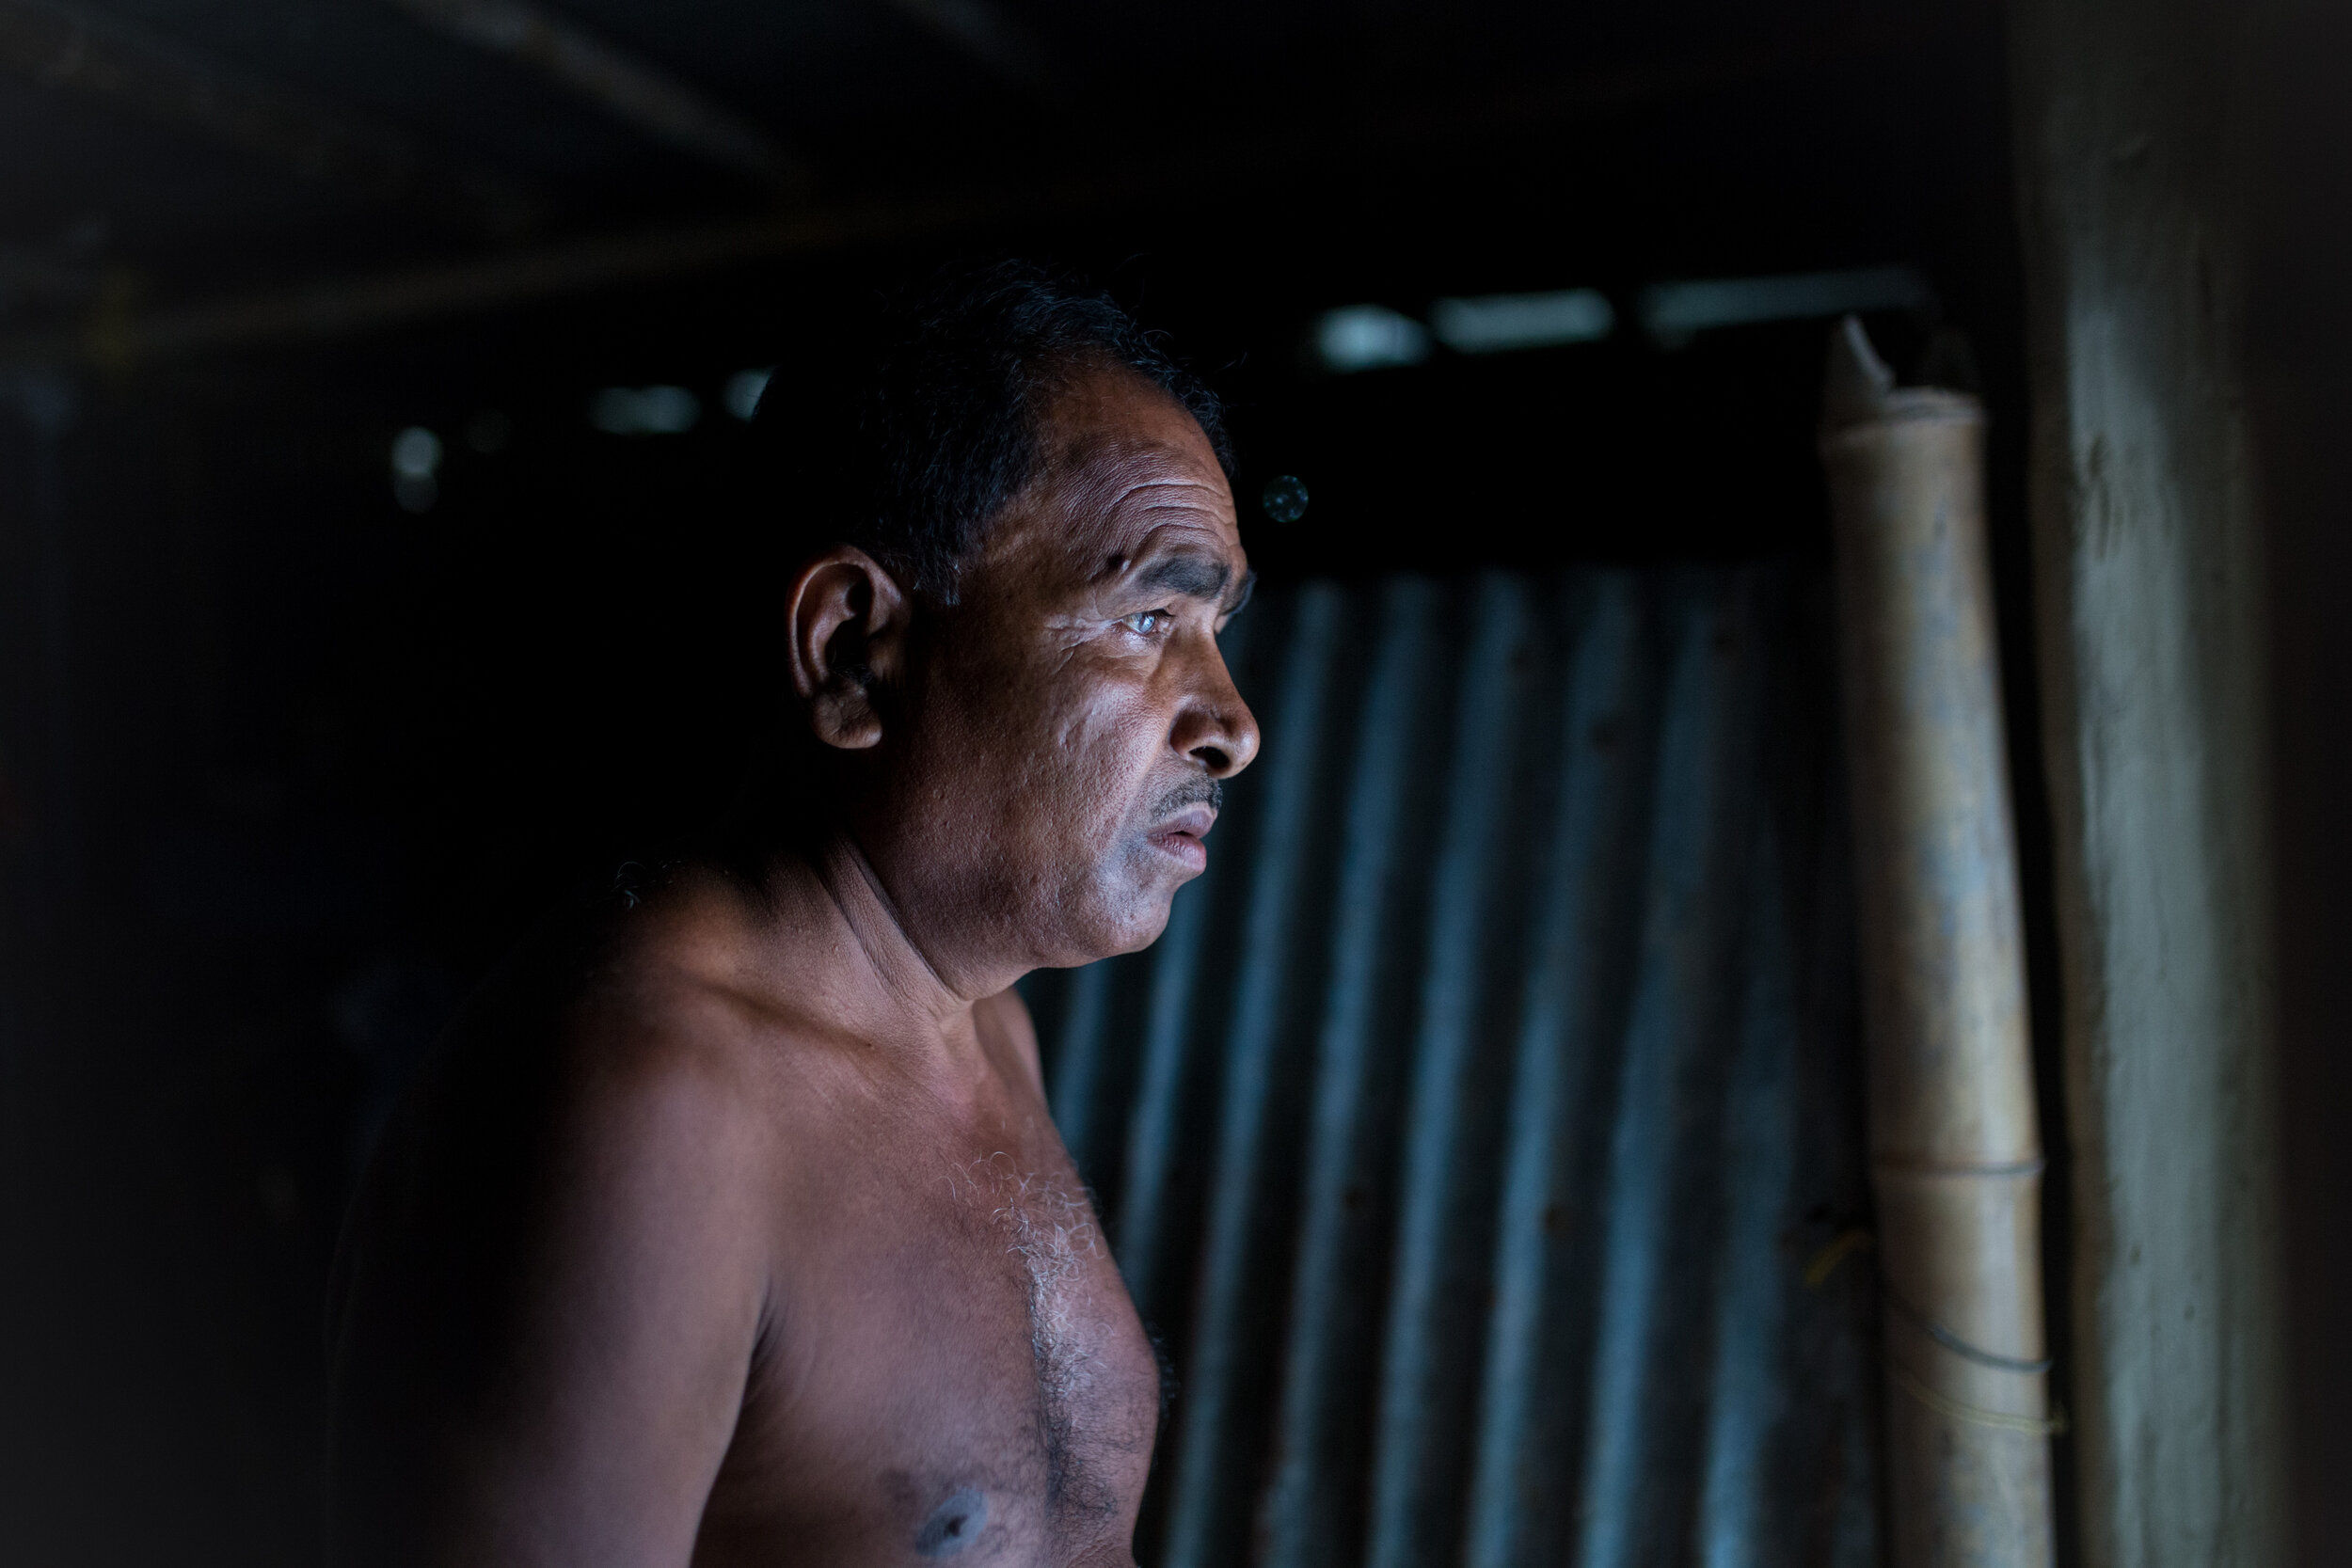  Basav * in his home in West Bengal. He a 55 year old man, who had to sell his kidney to pay for one of his daughter’s dowry. Since then, both his wife and son have sold their organs for the same reason.   *name changed  